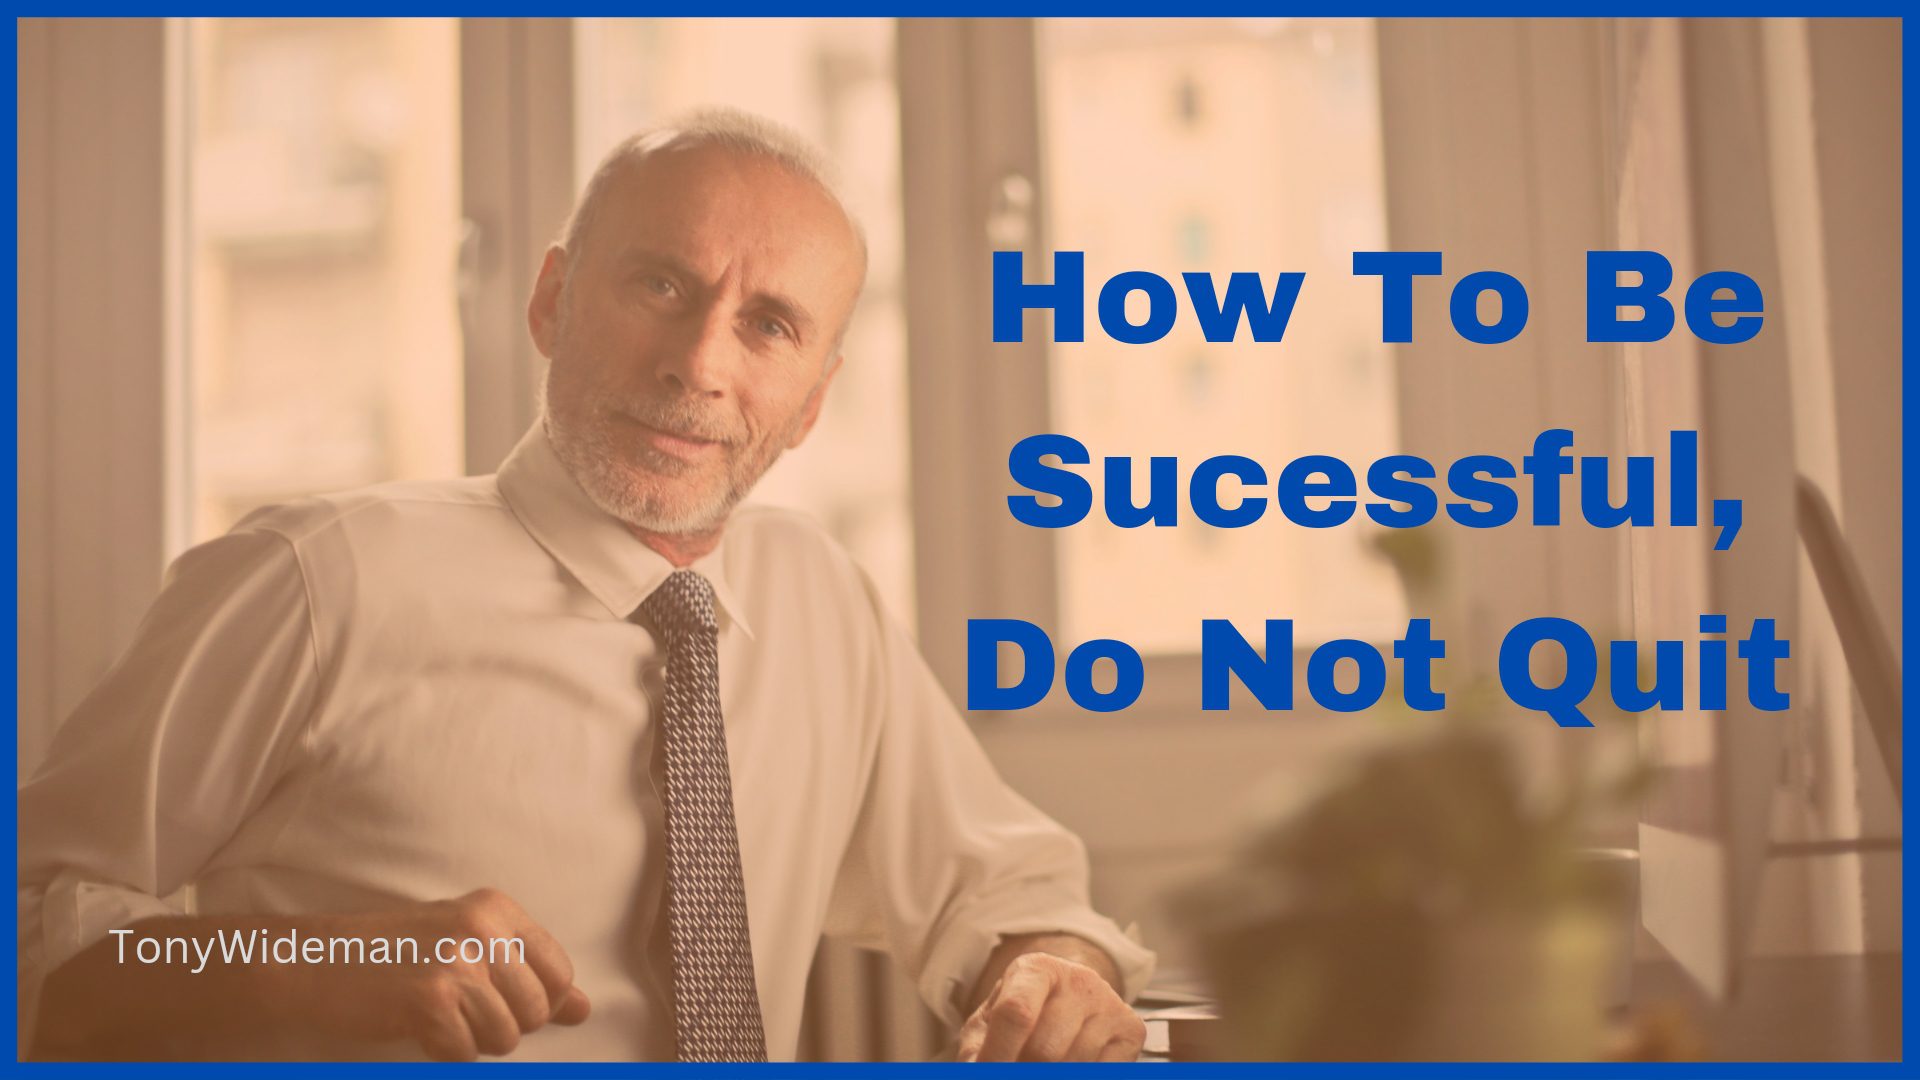 How To Be Successful at Anything, Do Not Quit